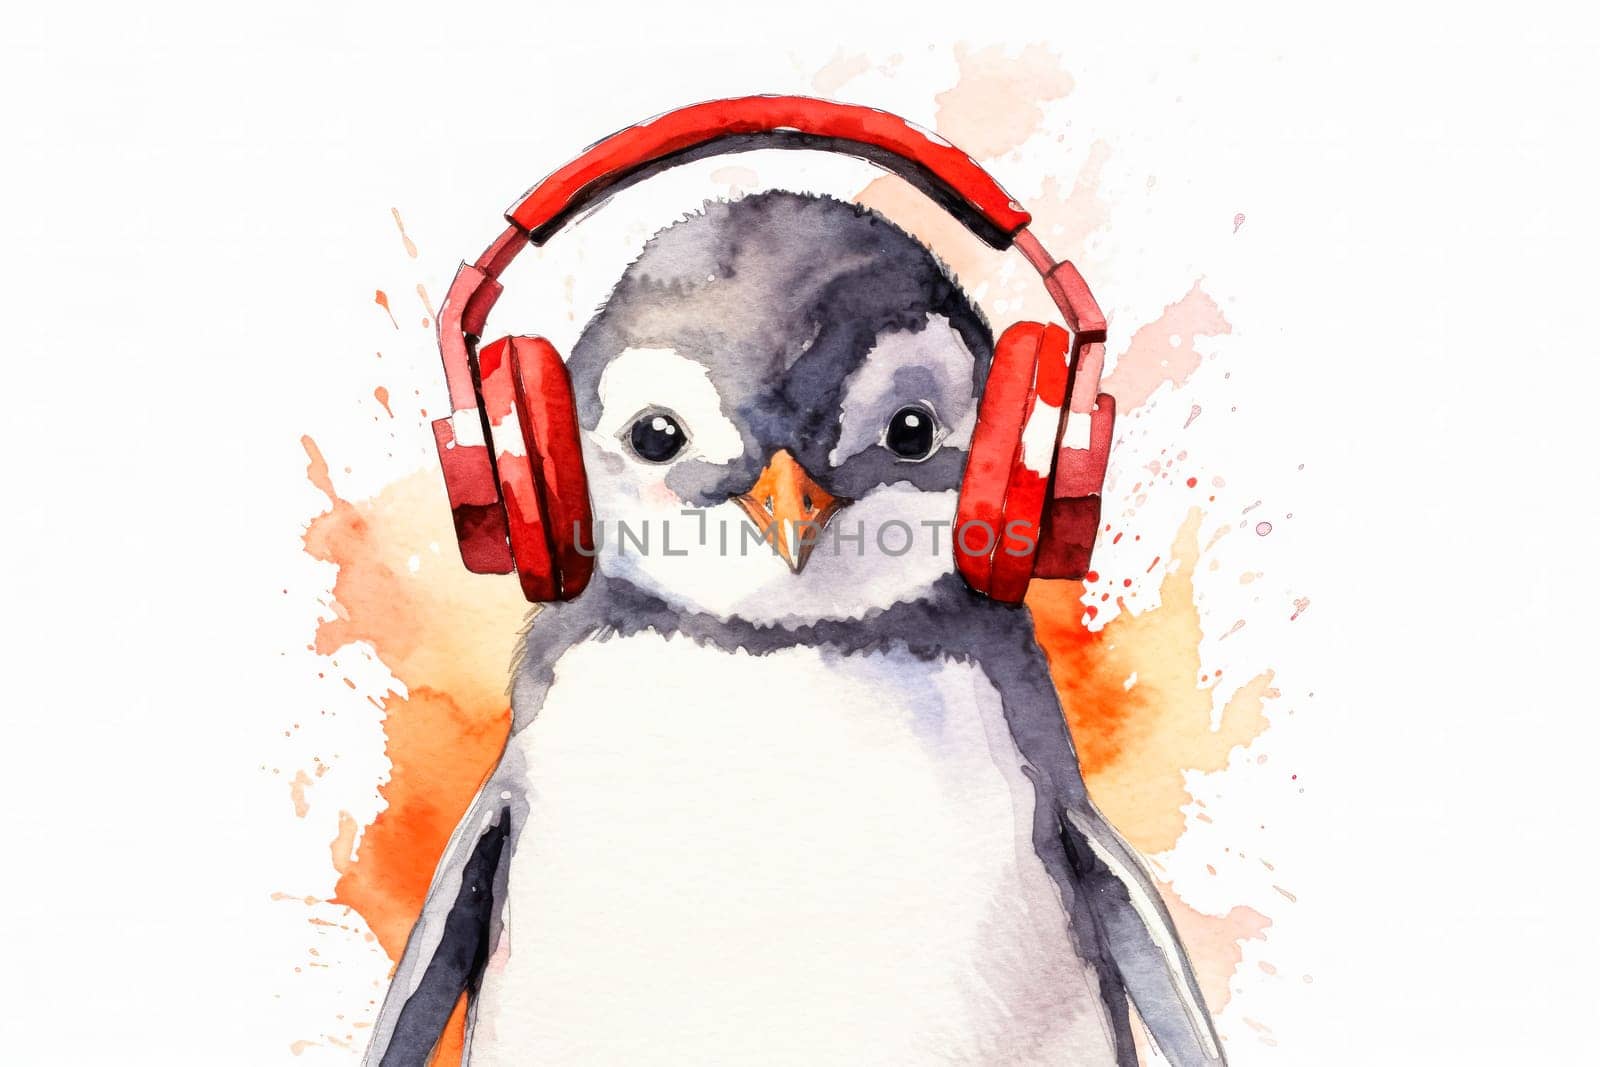 A lively watercolor artwork featuring a cute penguin wearing headphones by Alla_Morozova93